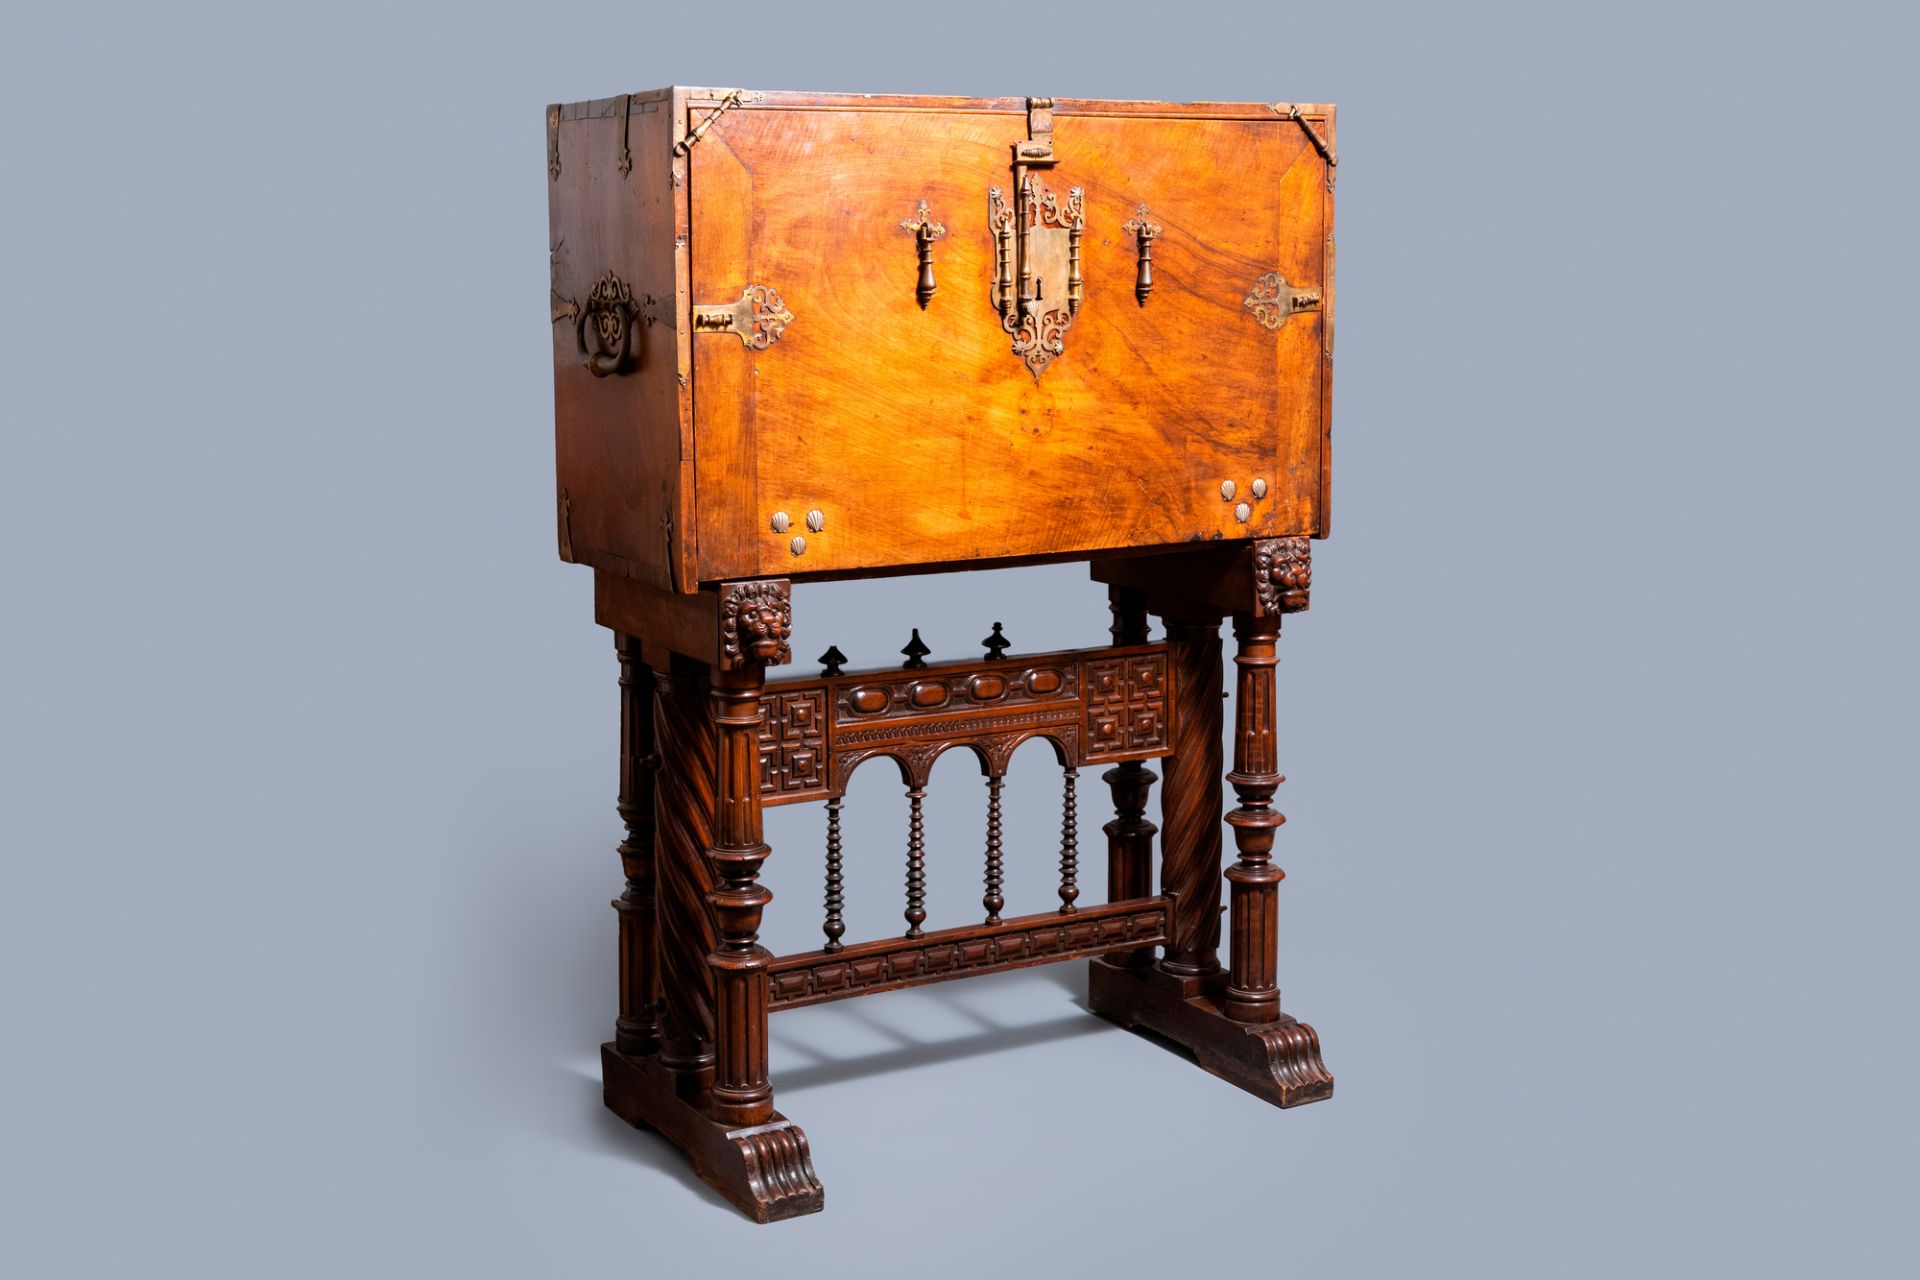 A Spanish bronze-mounted oak 'bargue–o' or cabinet on stand, 16th C.